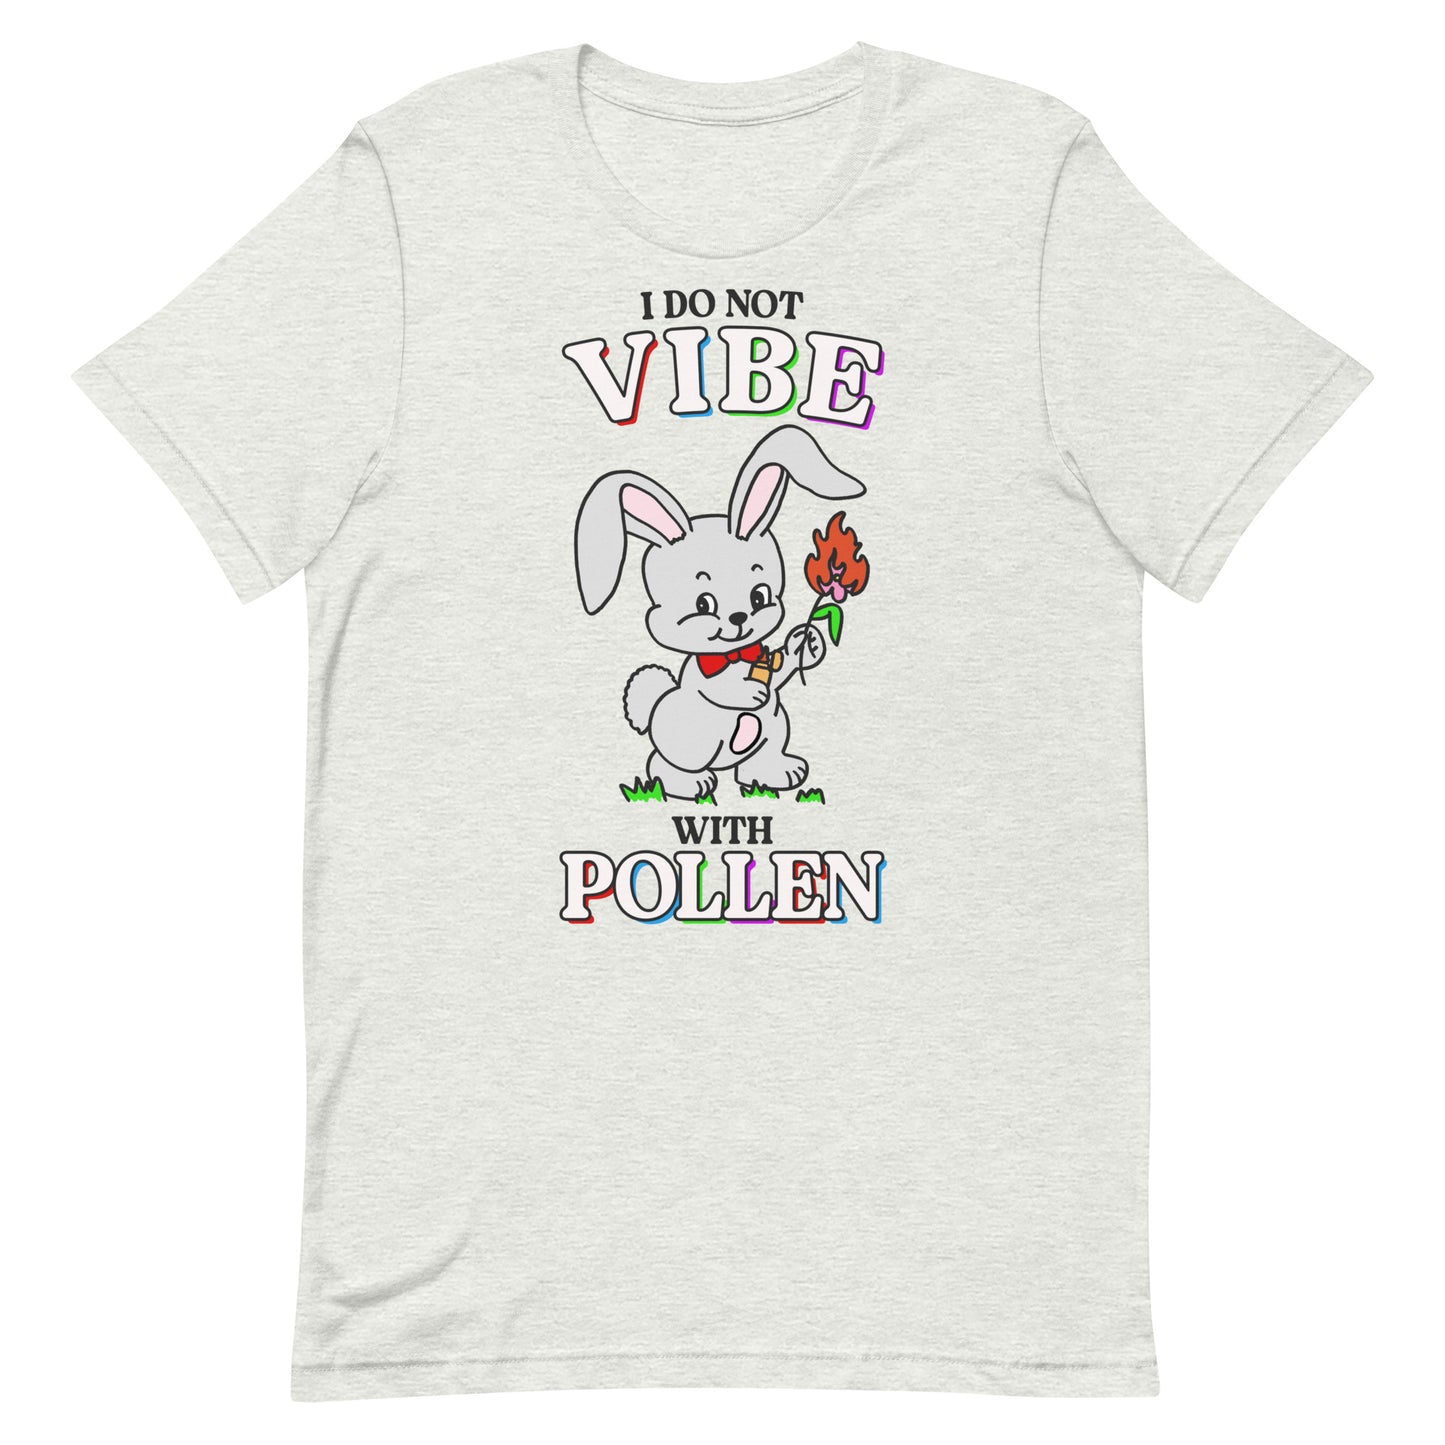 I Do Not Vibe with Pollen Unisex t-shirt